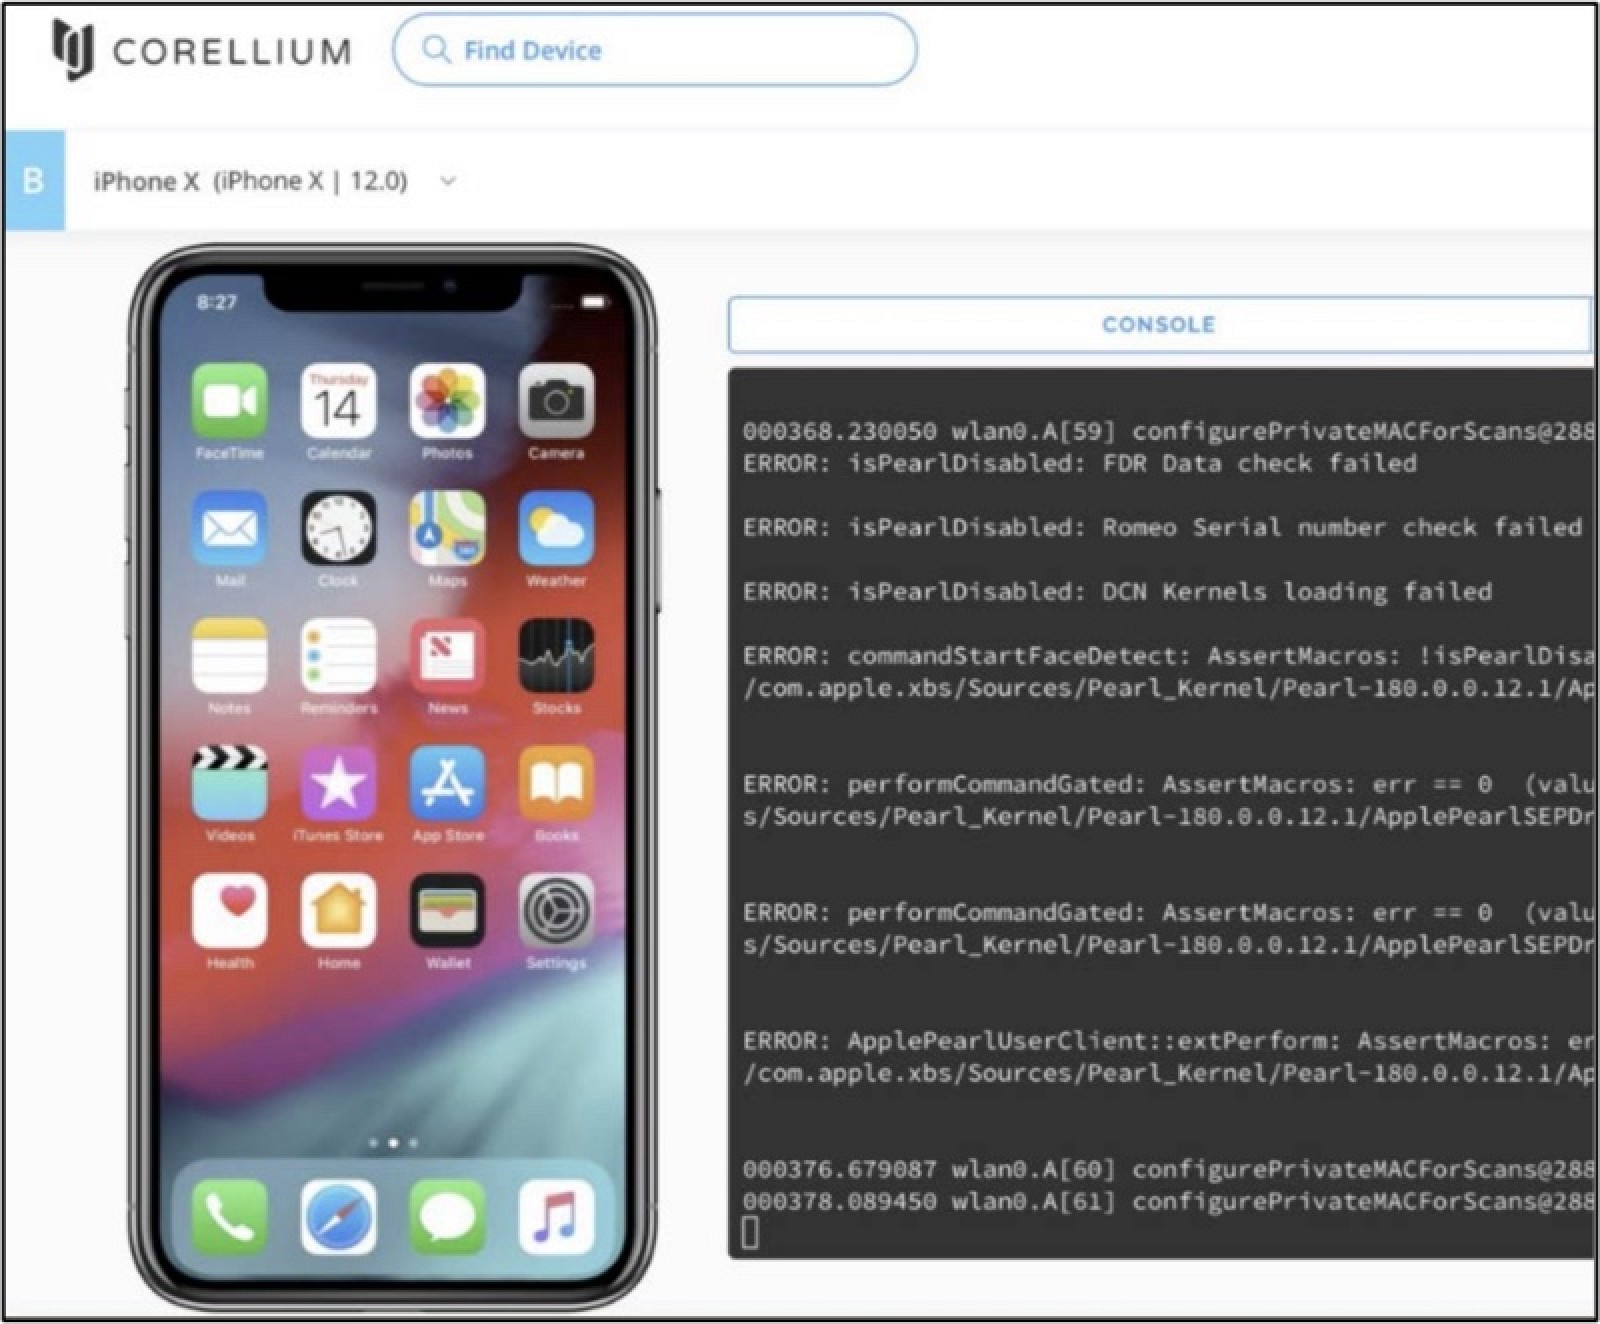 Apple Files Lawsuit Against Virtualization Company Corellium for Illegally Replicating iOS and Apple Apps